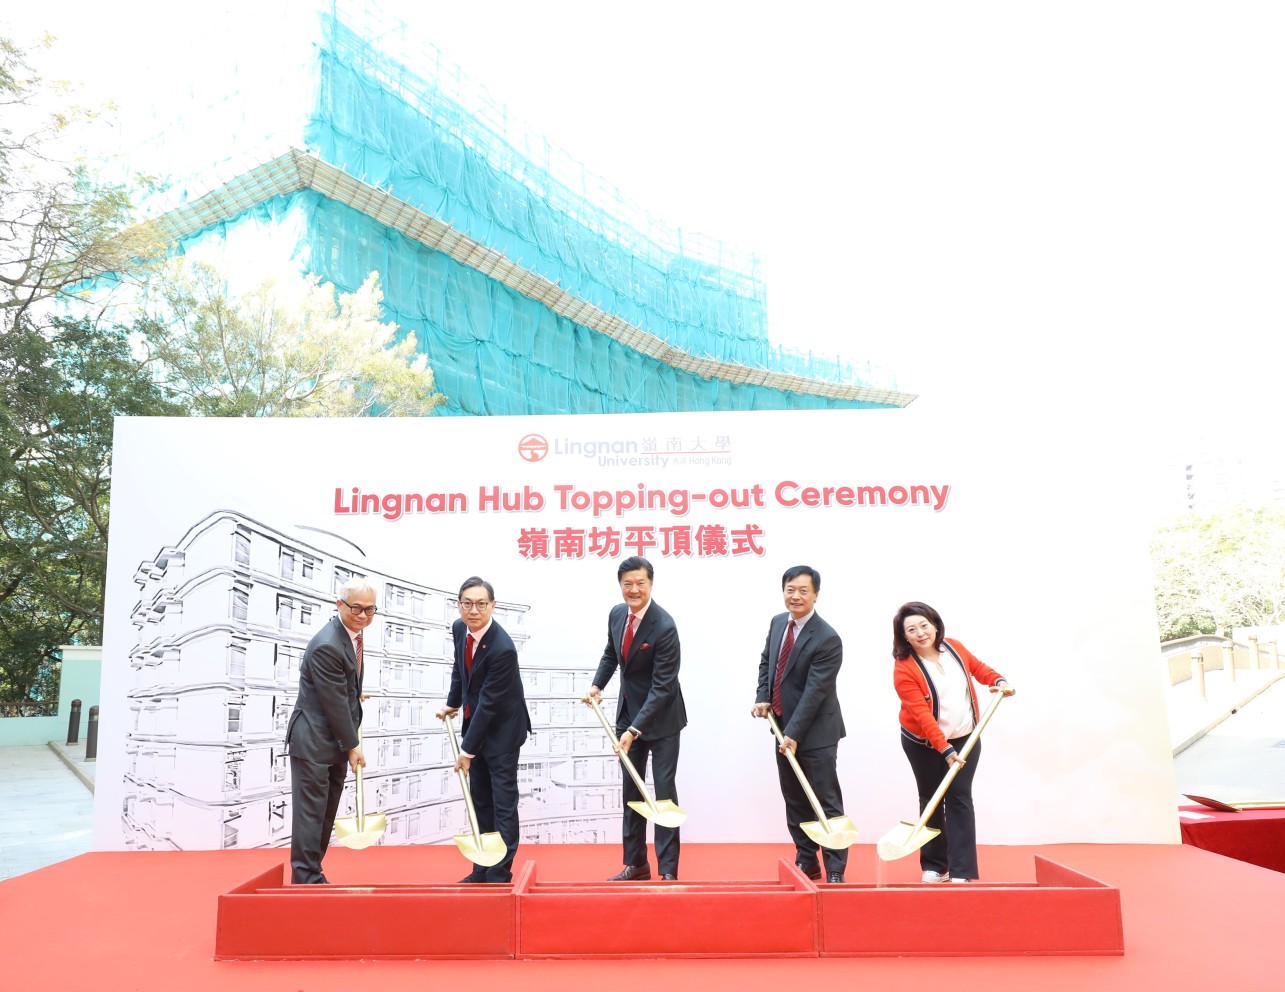 Lingnan University holds topping-out ceremony for Lingnan Hub. From left: Dr Patrick Wong Chi-kwong, Chairman of the Court of Lingnan University; Mr Augustine Wong Ho-ming, Deputy Chairman of the Council of Lingnan University; Mr Andrew Yao Cho-fai, Council Chairman; Prof. S. Joe Qin, President and Wai Kee Kau Chair Professor of Data Science; and Ms Katherine Cheung Marn-kay, Council Treasurer.